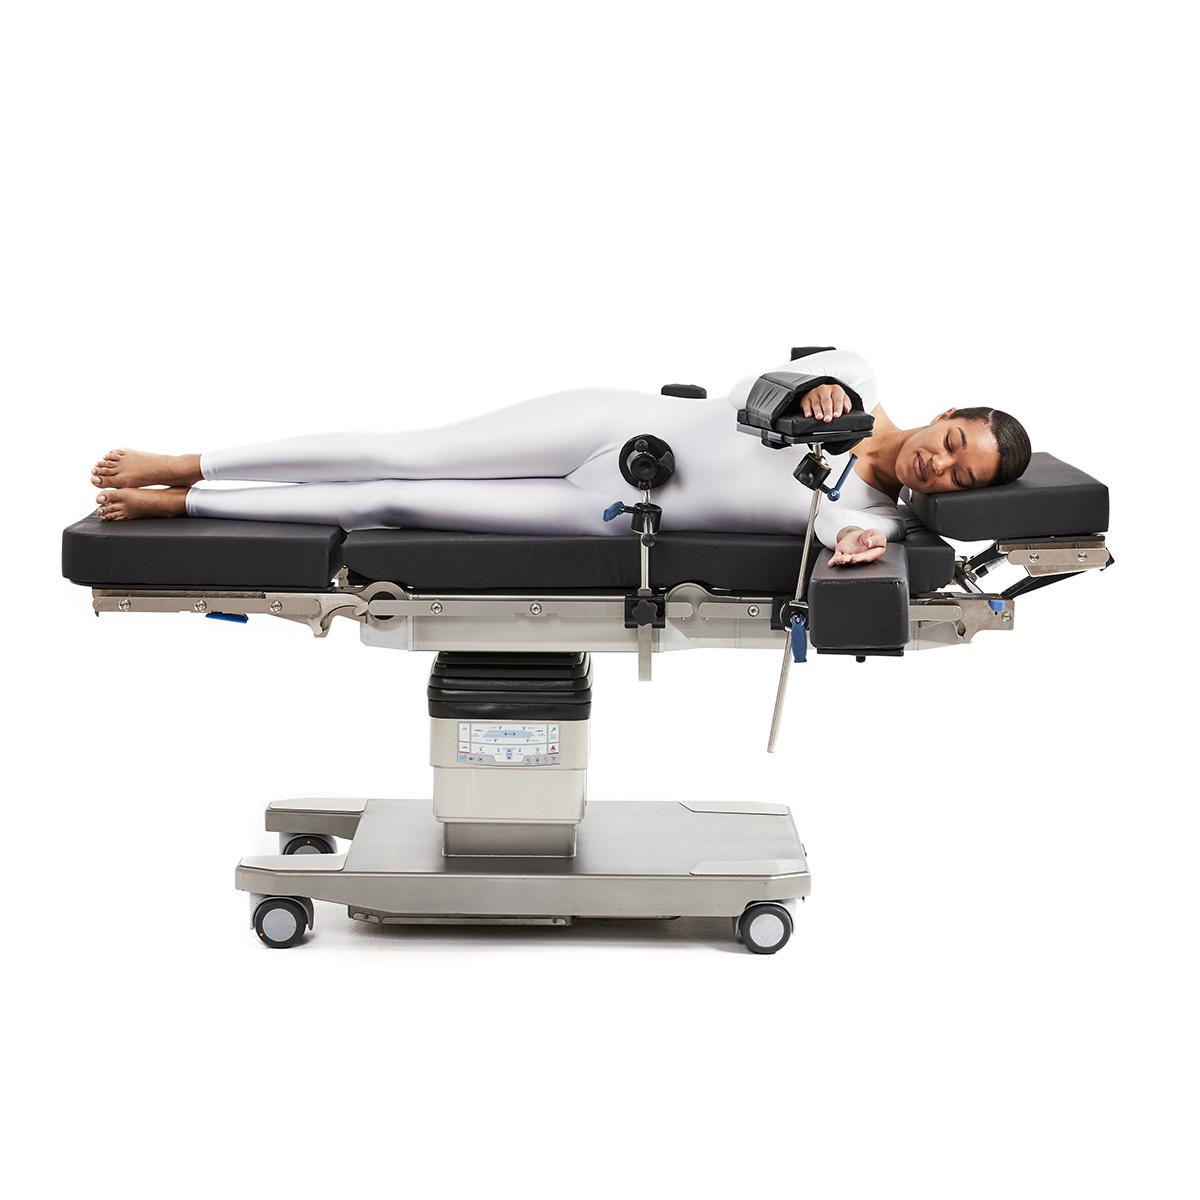 Patient in lateral position on surgical table being supported by siderail mounted braces.